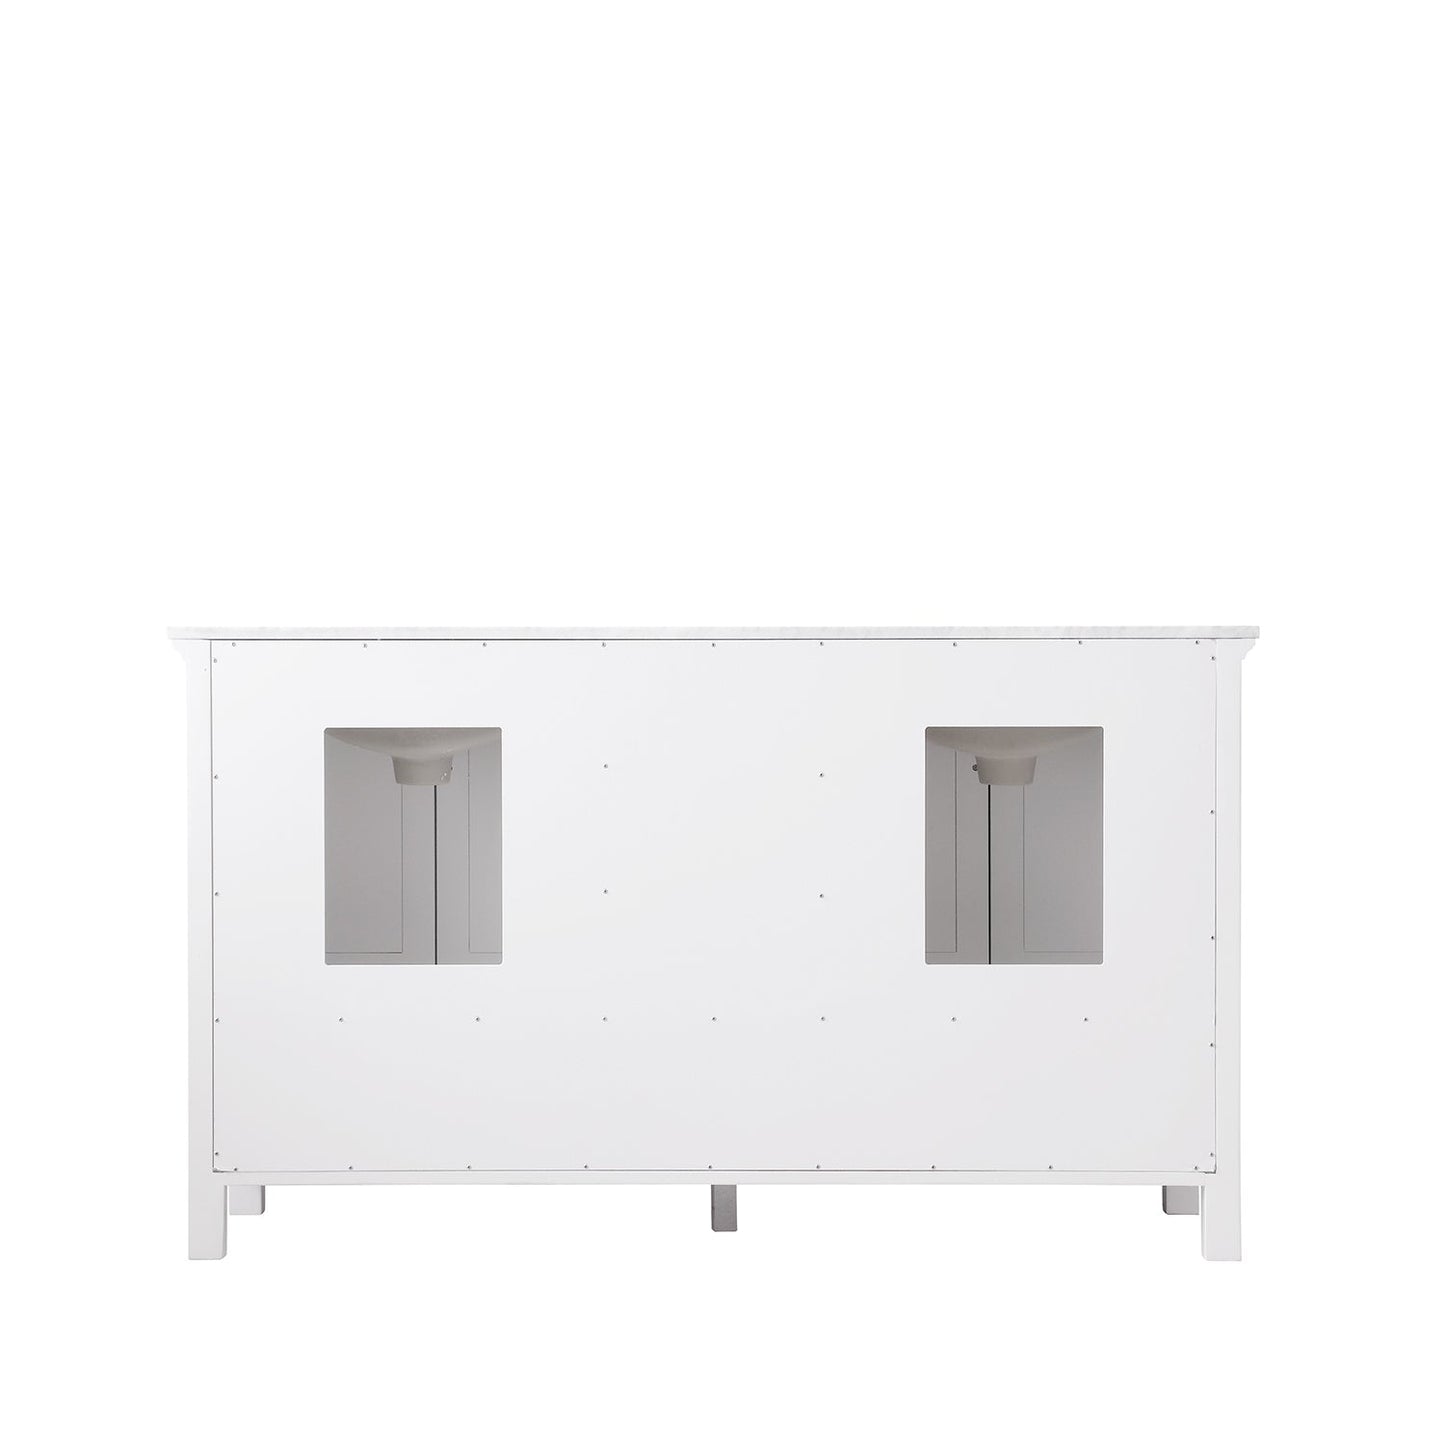 Isla 60" Double Bathroom Vanity Set in White and Carrara White Marble Countertop without Mirror